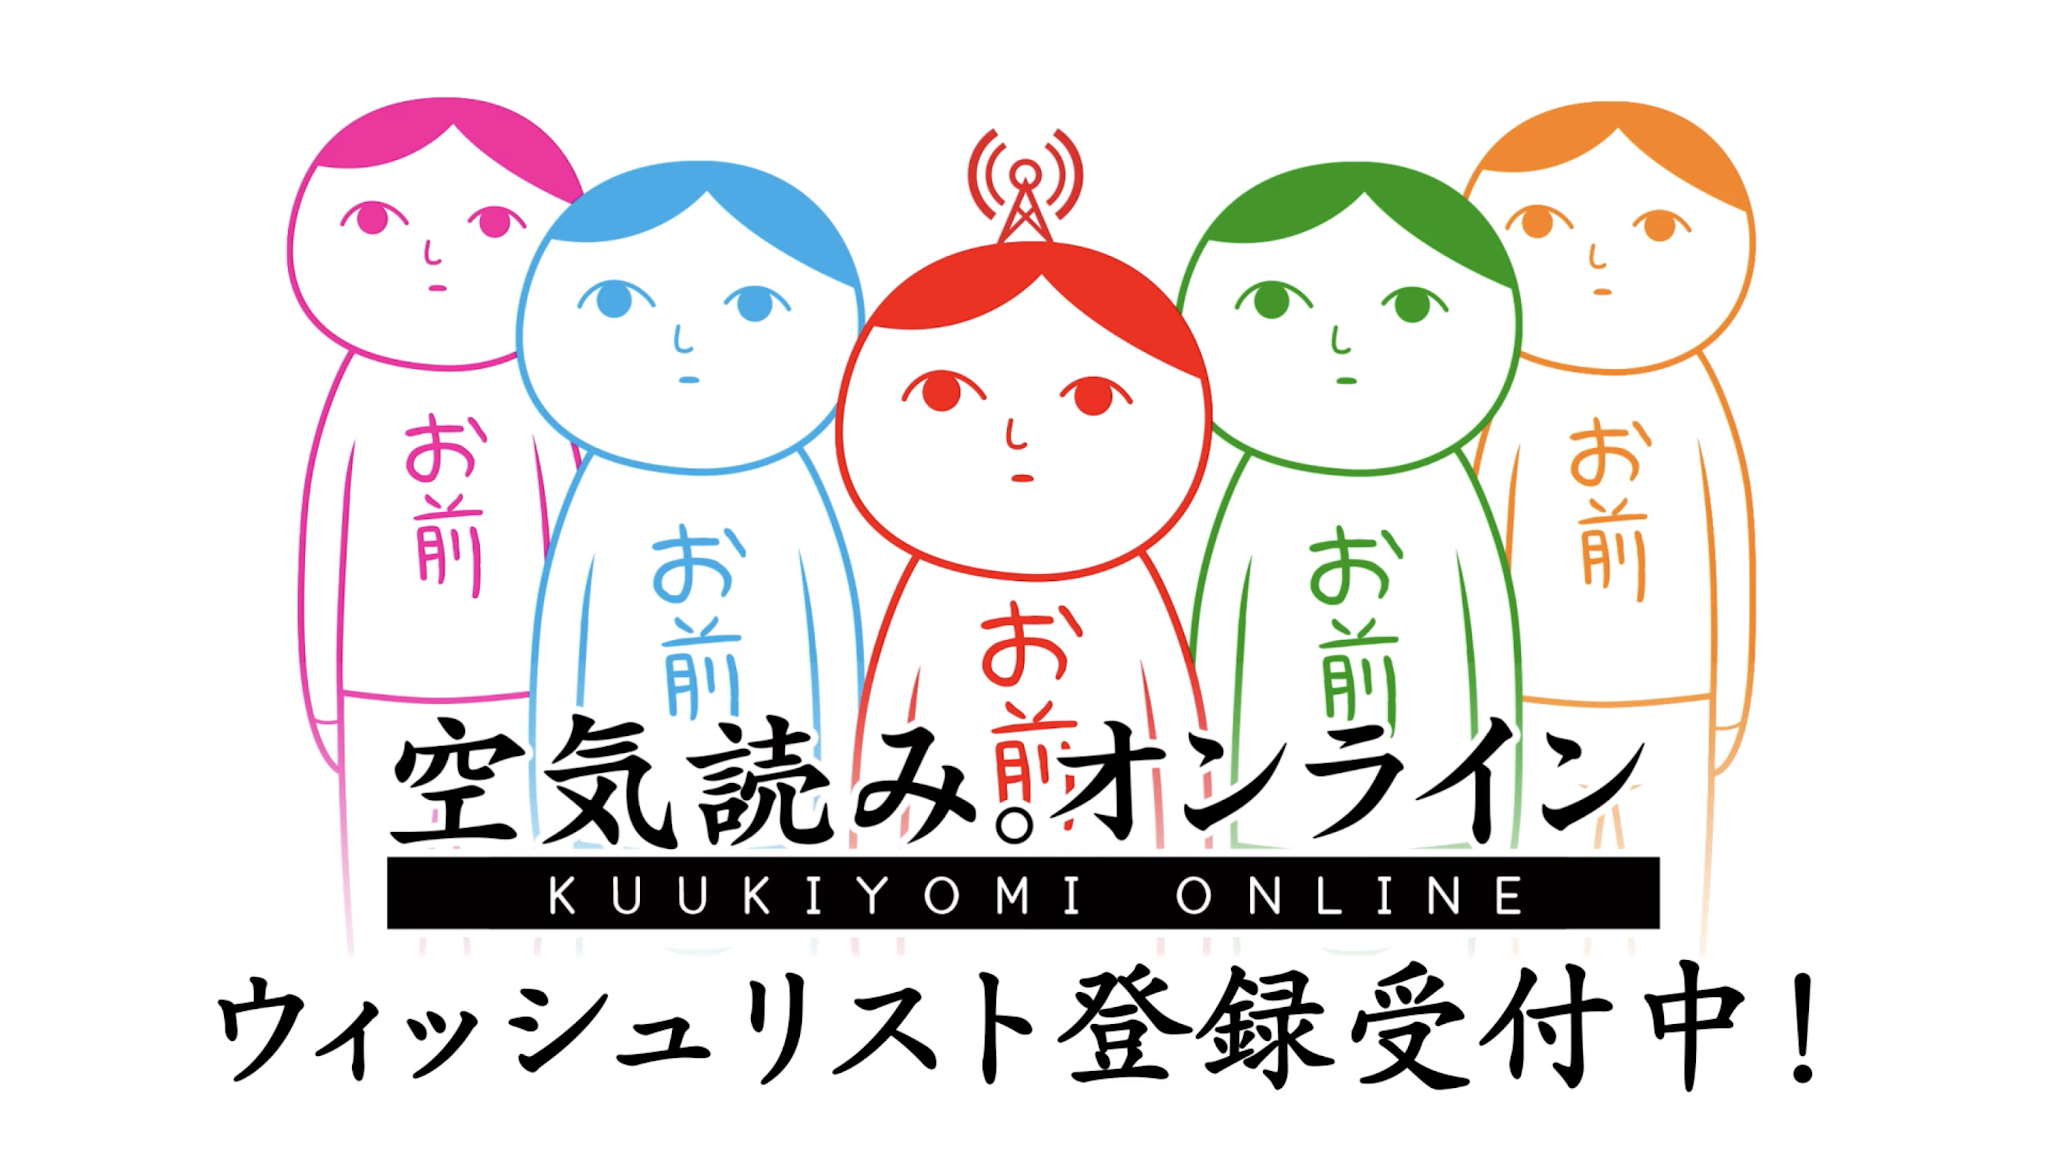 Kuukiyomi Online Coming to Switch in 2022